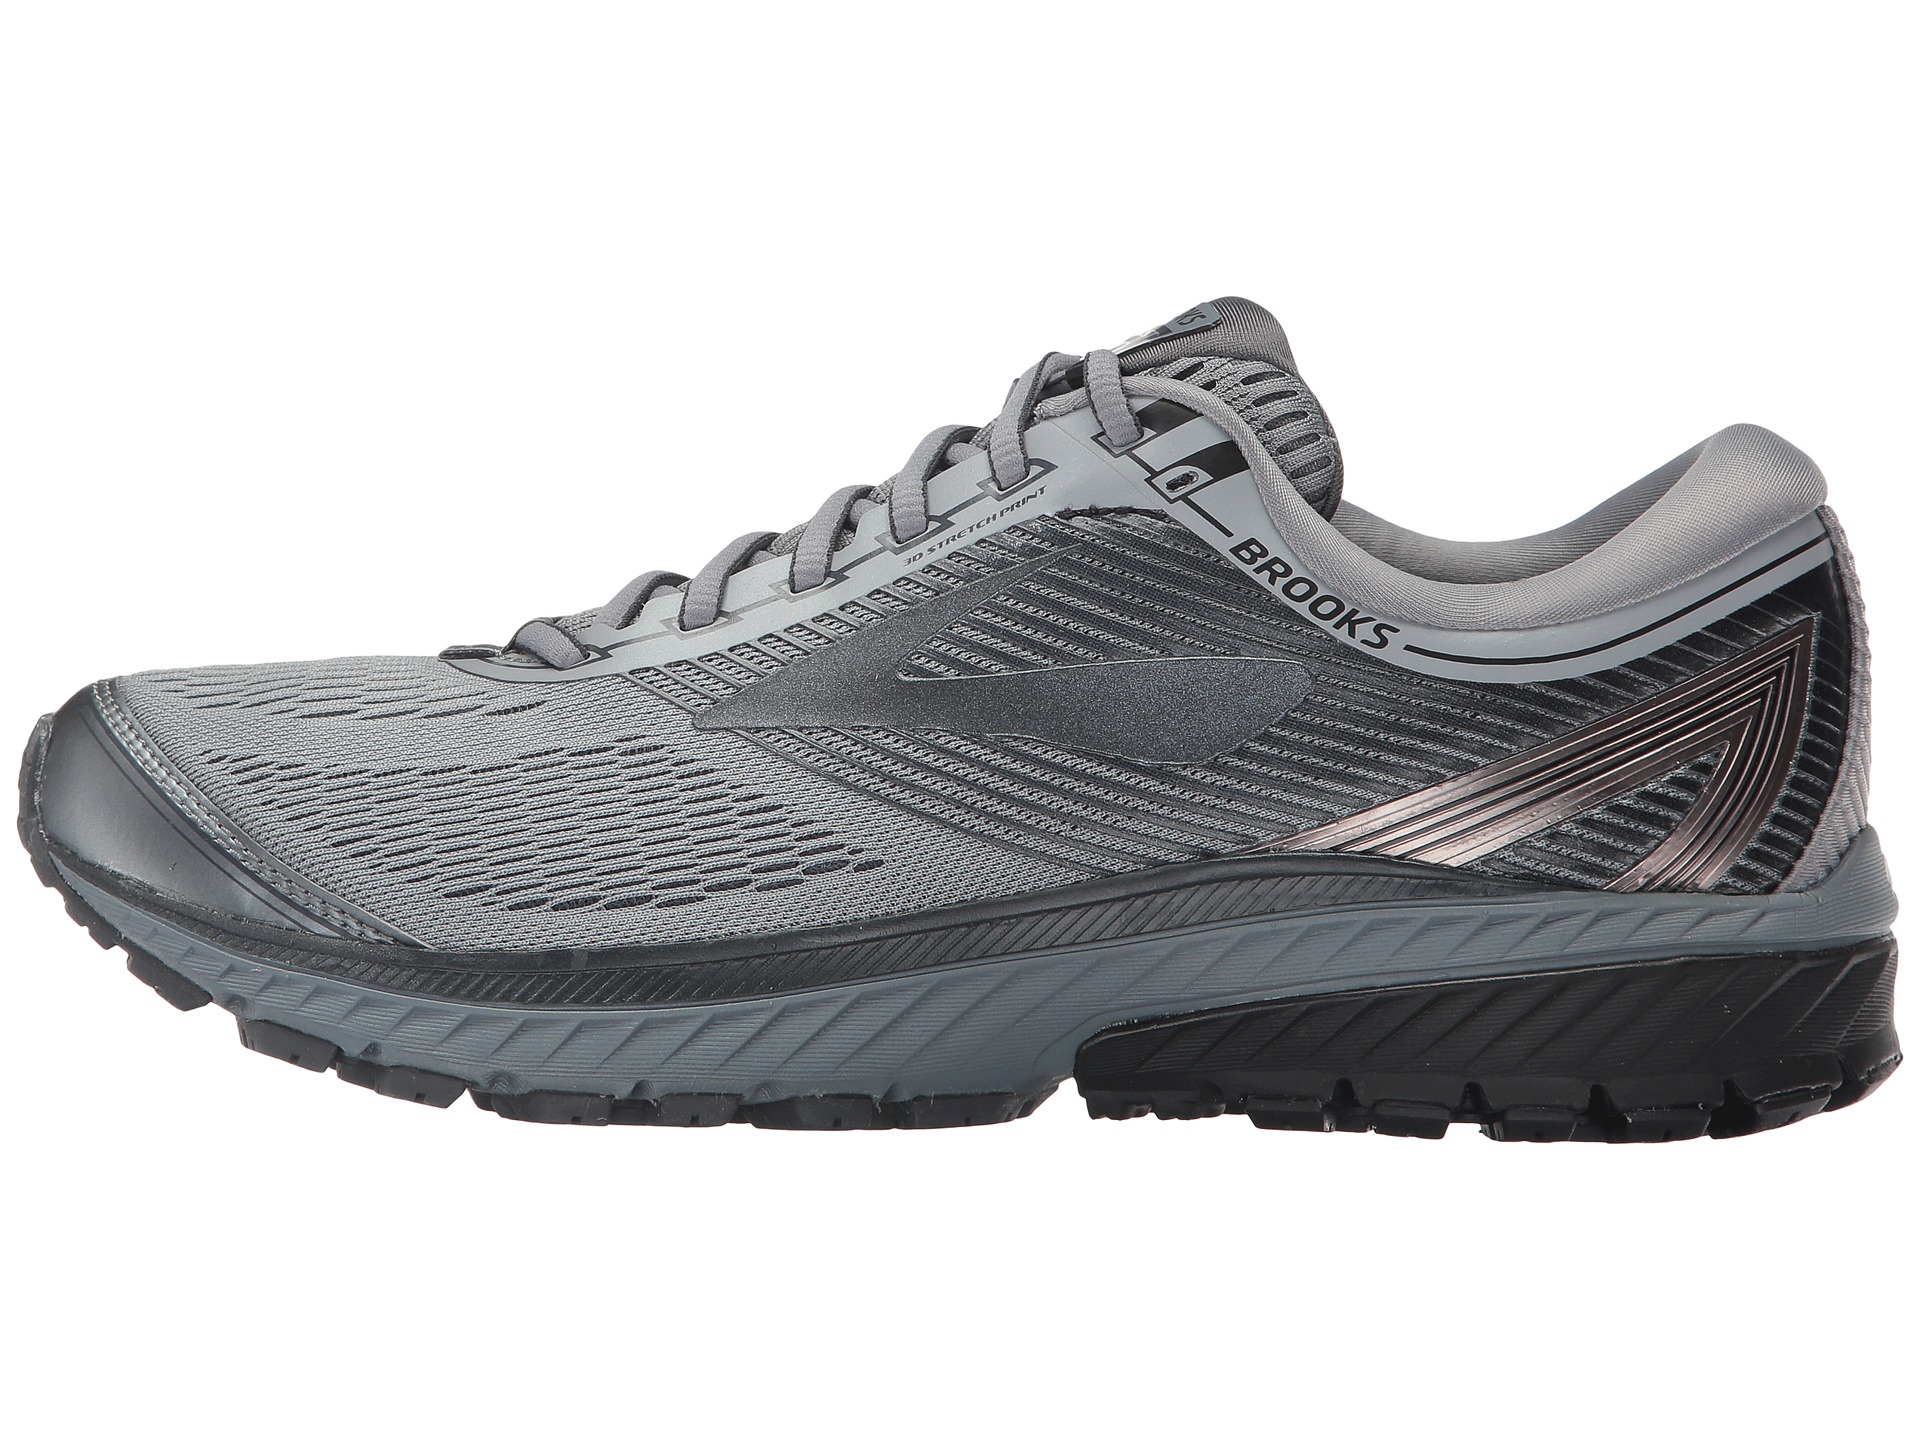 Brooks Ghost 10 at Zappos.com